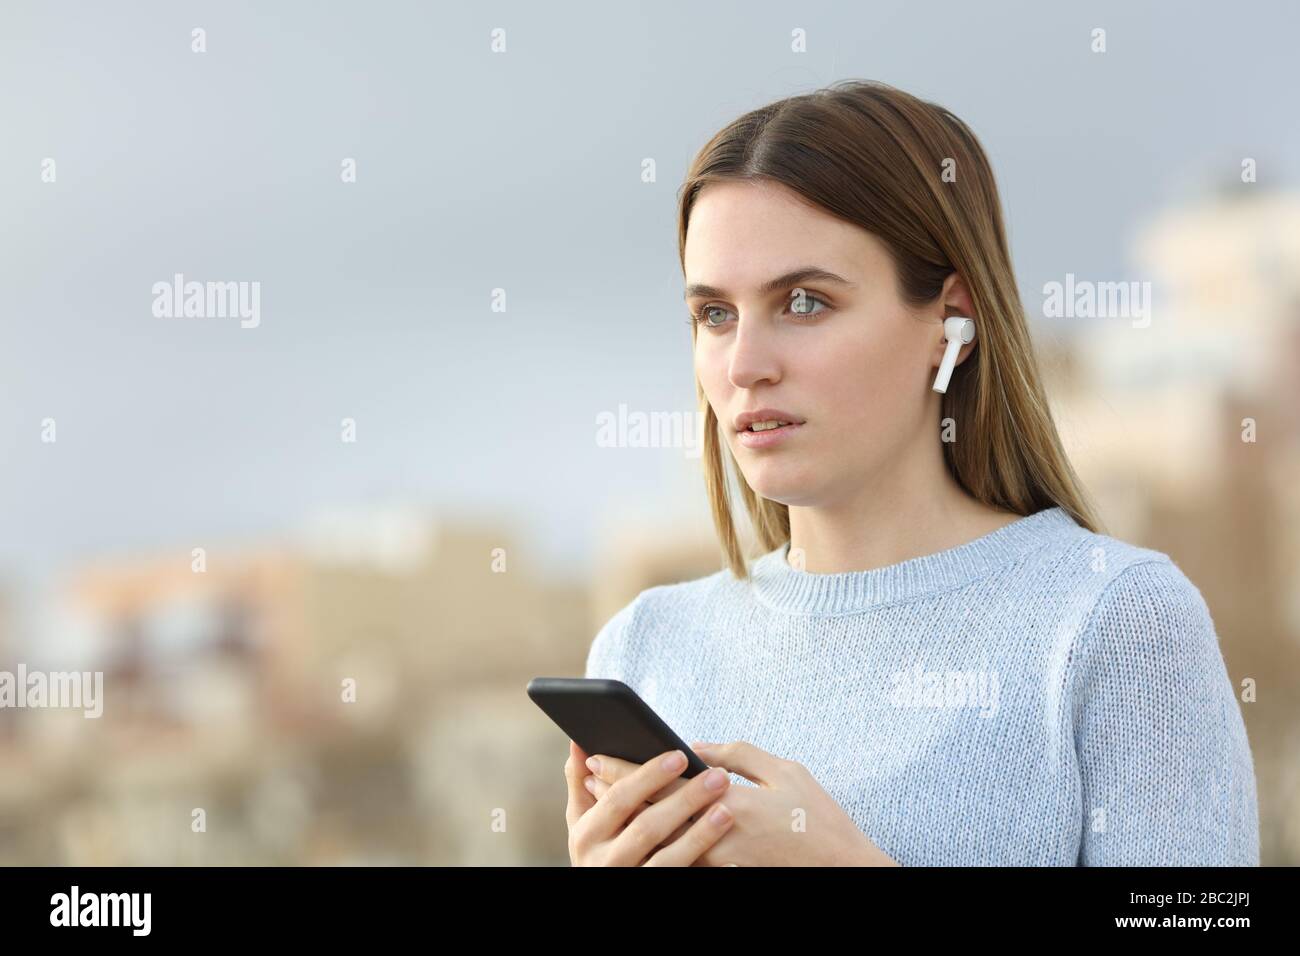 Serious girl looking away listening to music with earphones and mobile phone Stock Photo